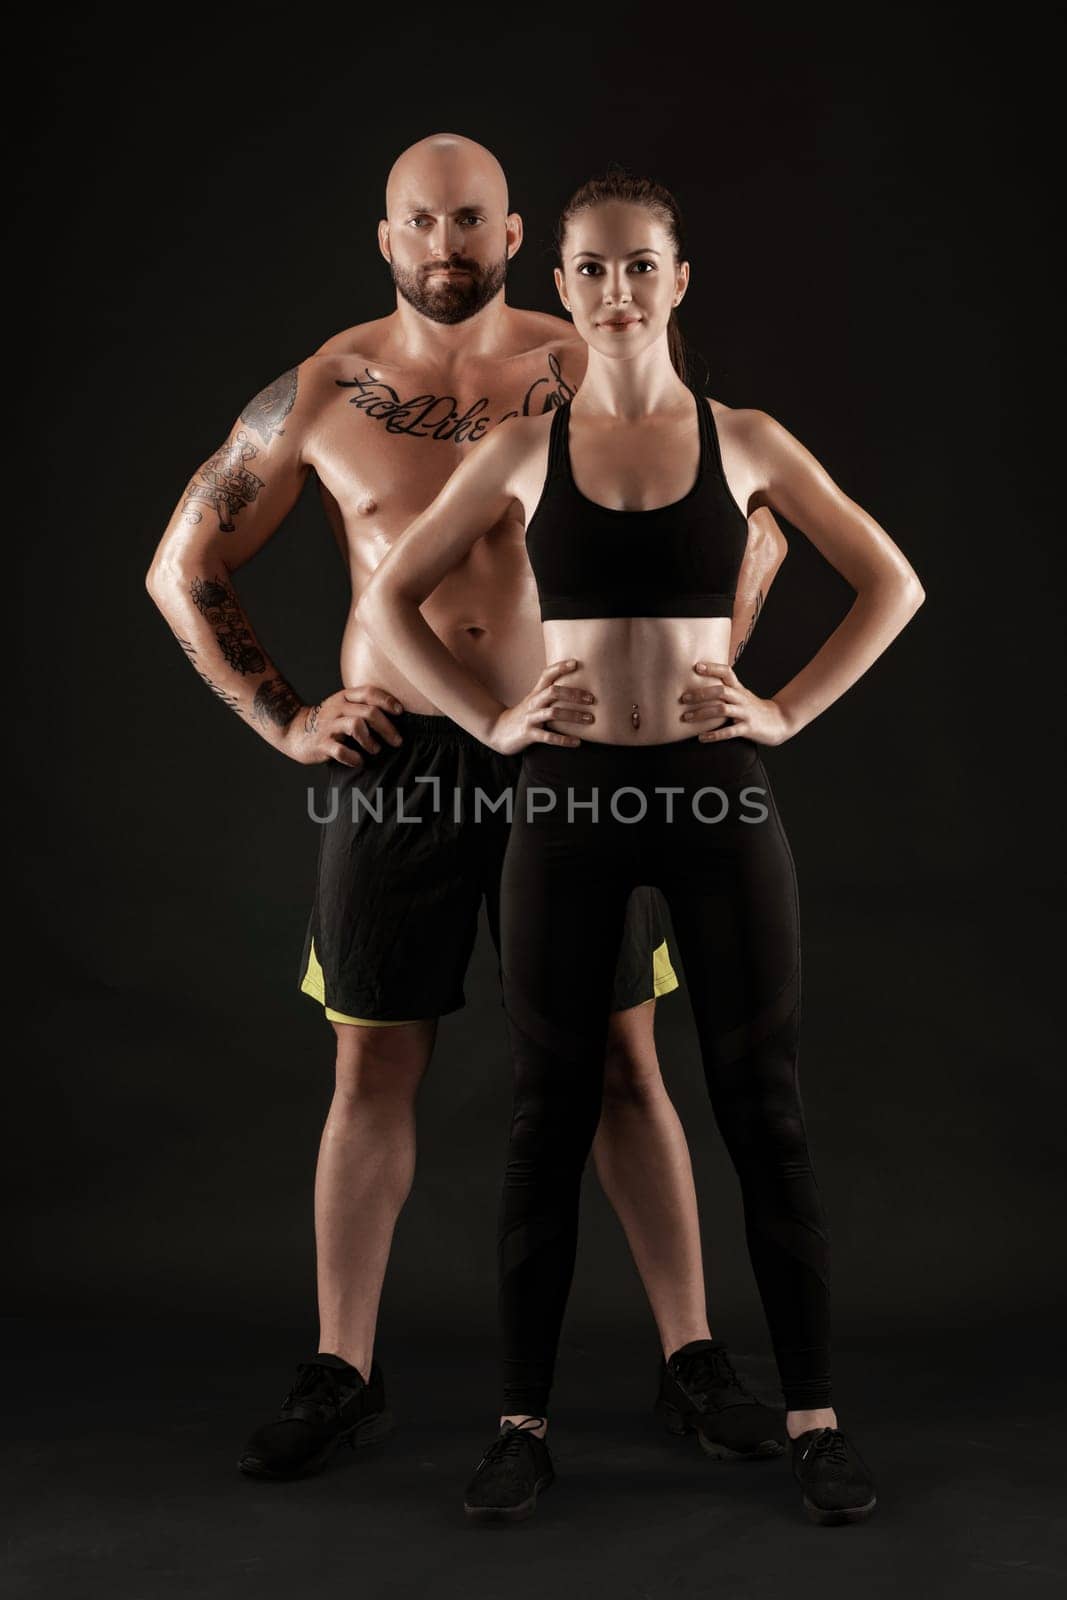 Handsome bald, tattooed man in black shorts and sneakers with gorgeous brunette maiden in leggings and top are posing on black background and looking at the camera. Fitness couple, chic muscular bodies, gym concept. The love story.